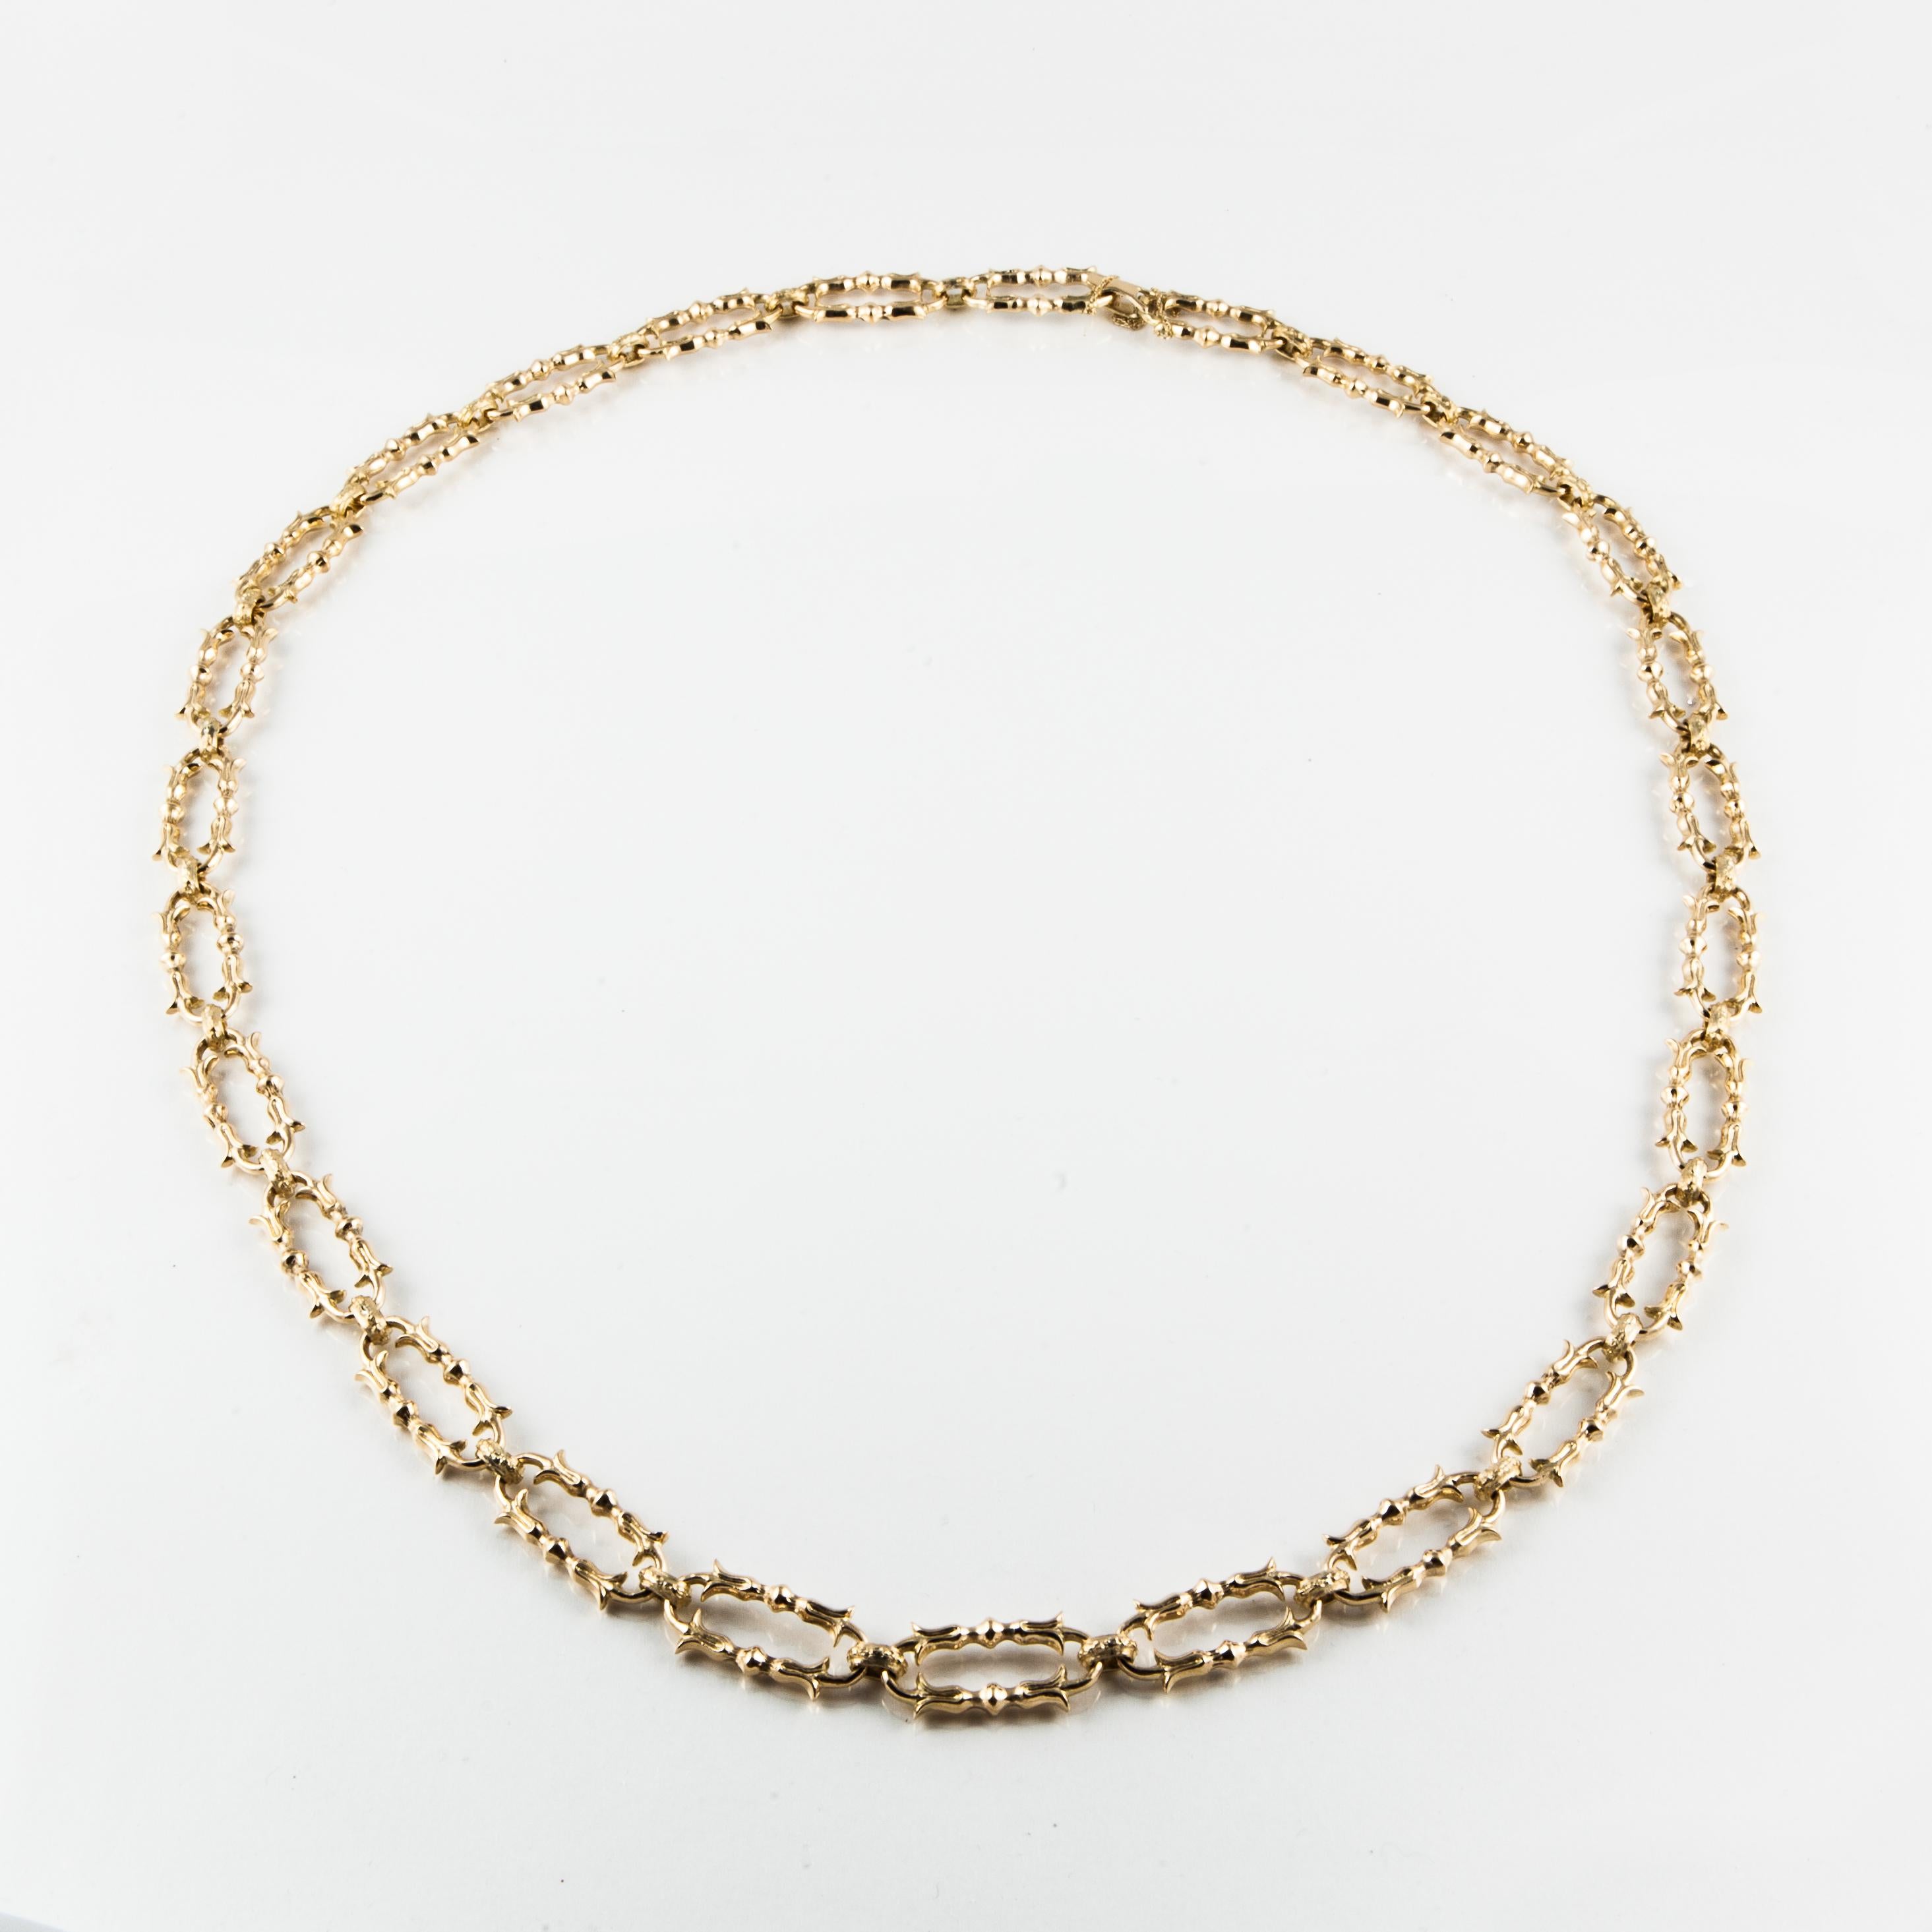 This necklace is composed of 18K yellow gold fancy links.  The necklace measures 32 inches in length.  Each link measures 1/2 inch wide and 1 1/8 inches long.  Has a fold over clasp.